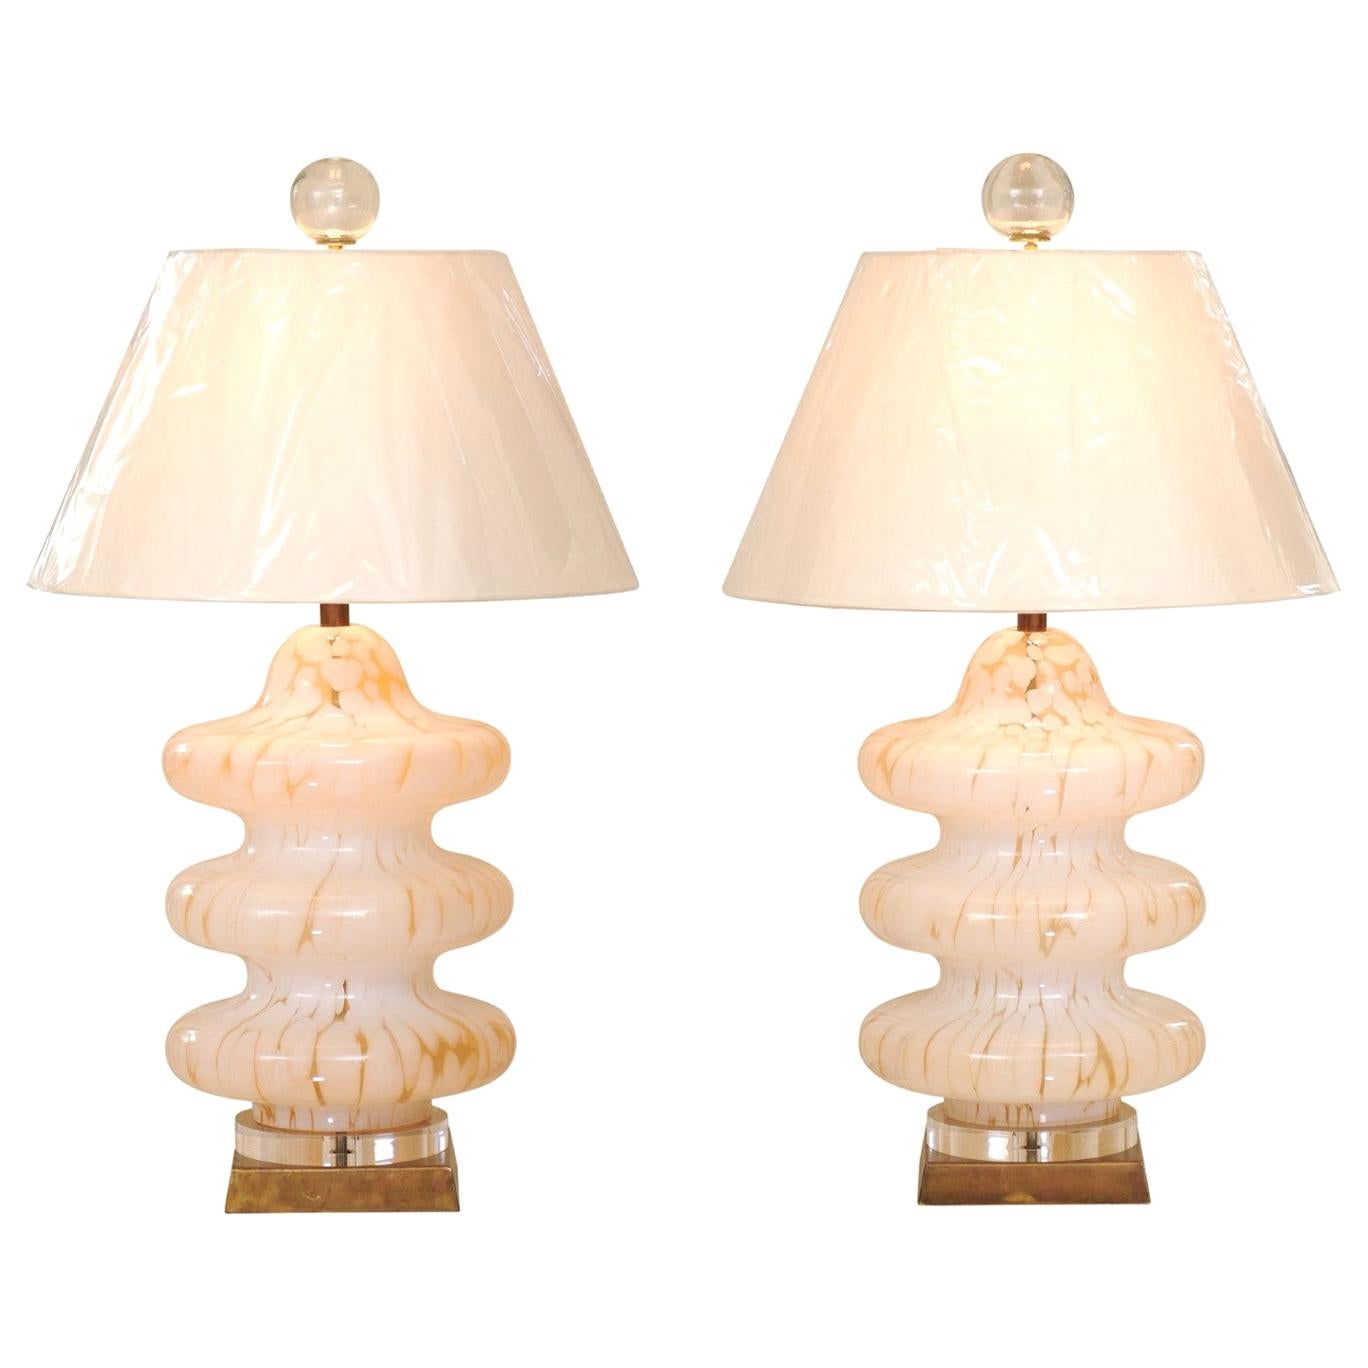 Exquisite Restored Amber Accent Blown Glass Pagoda Murano Lamps by Mazzega For Sale